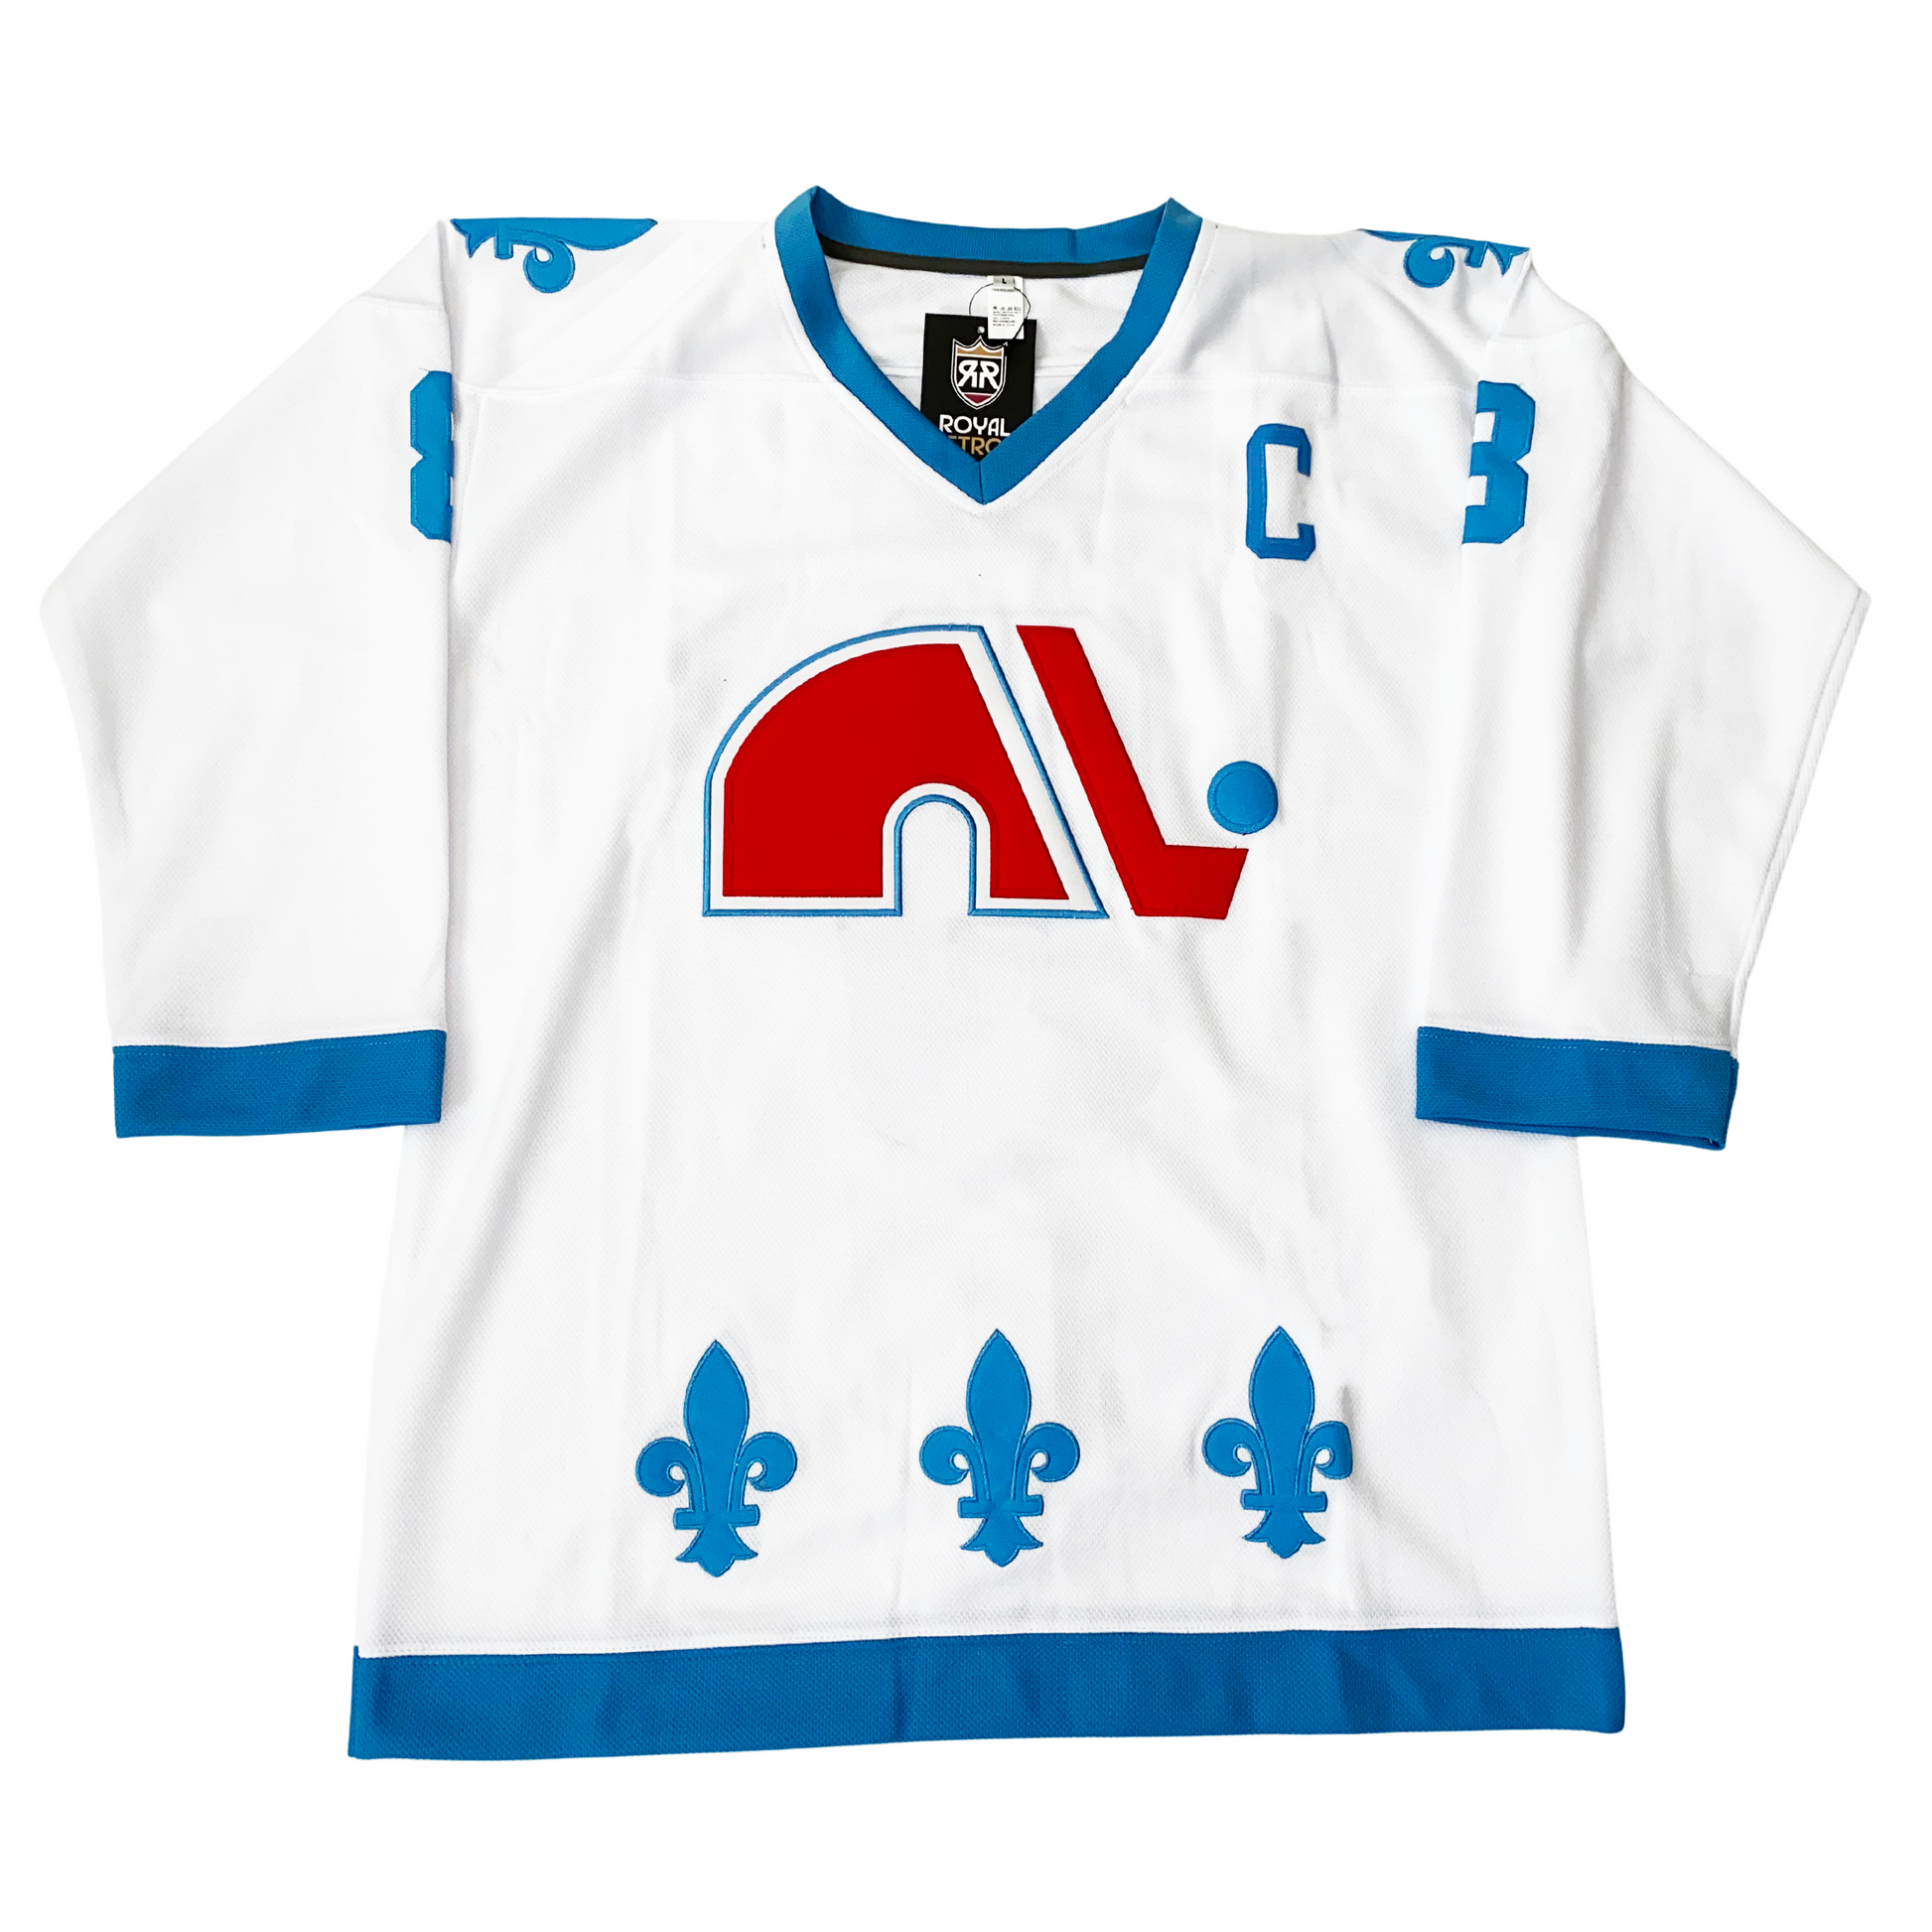 wha jersey products for sale